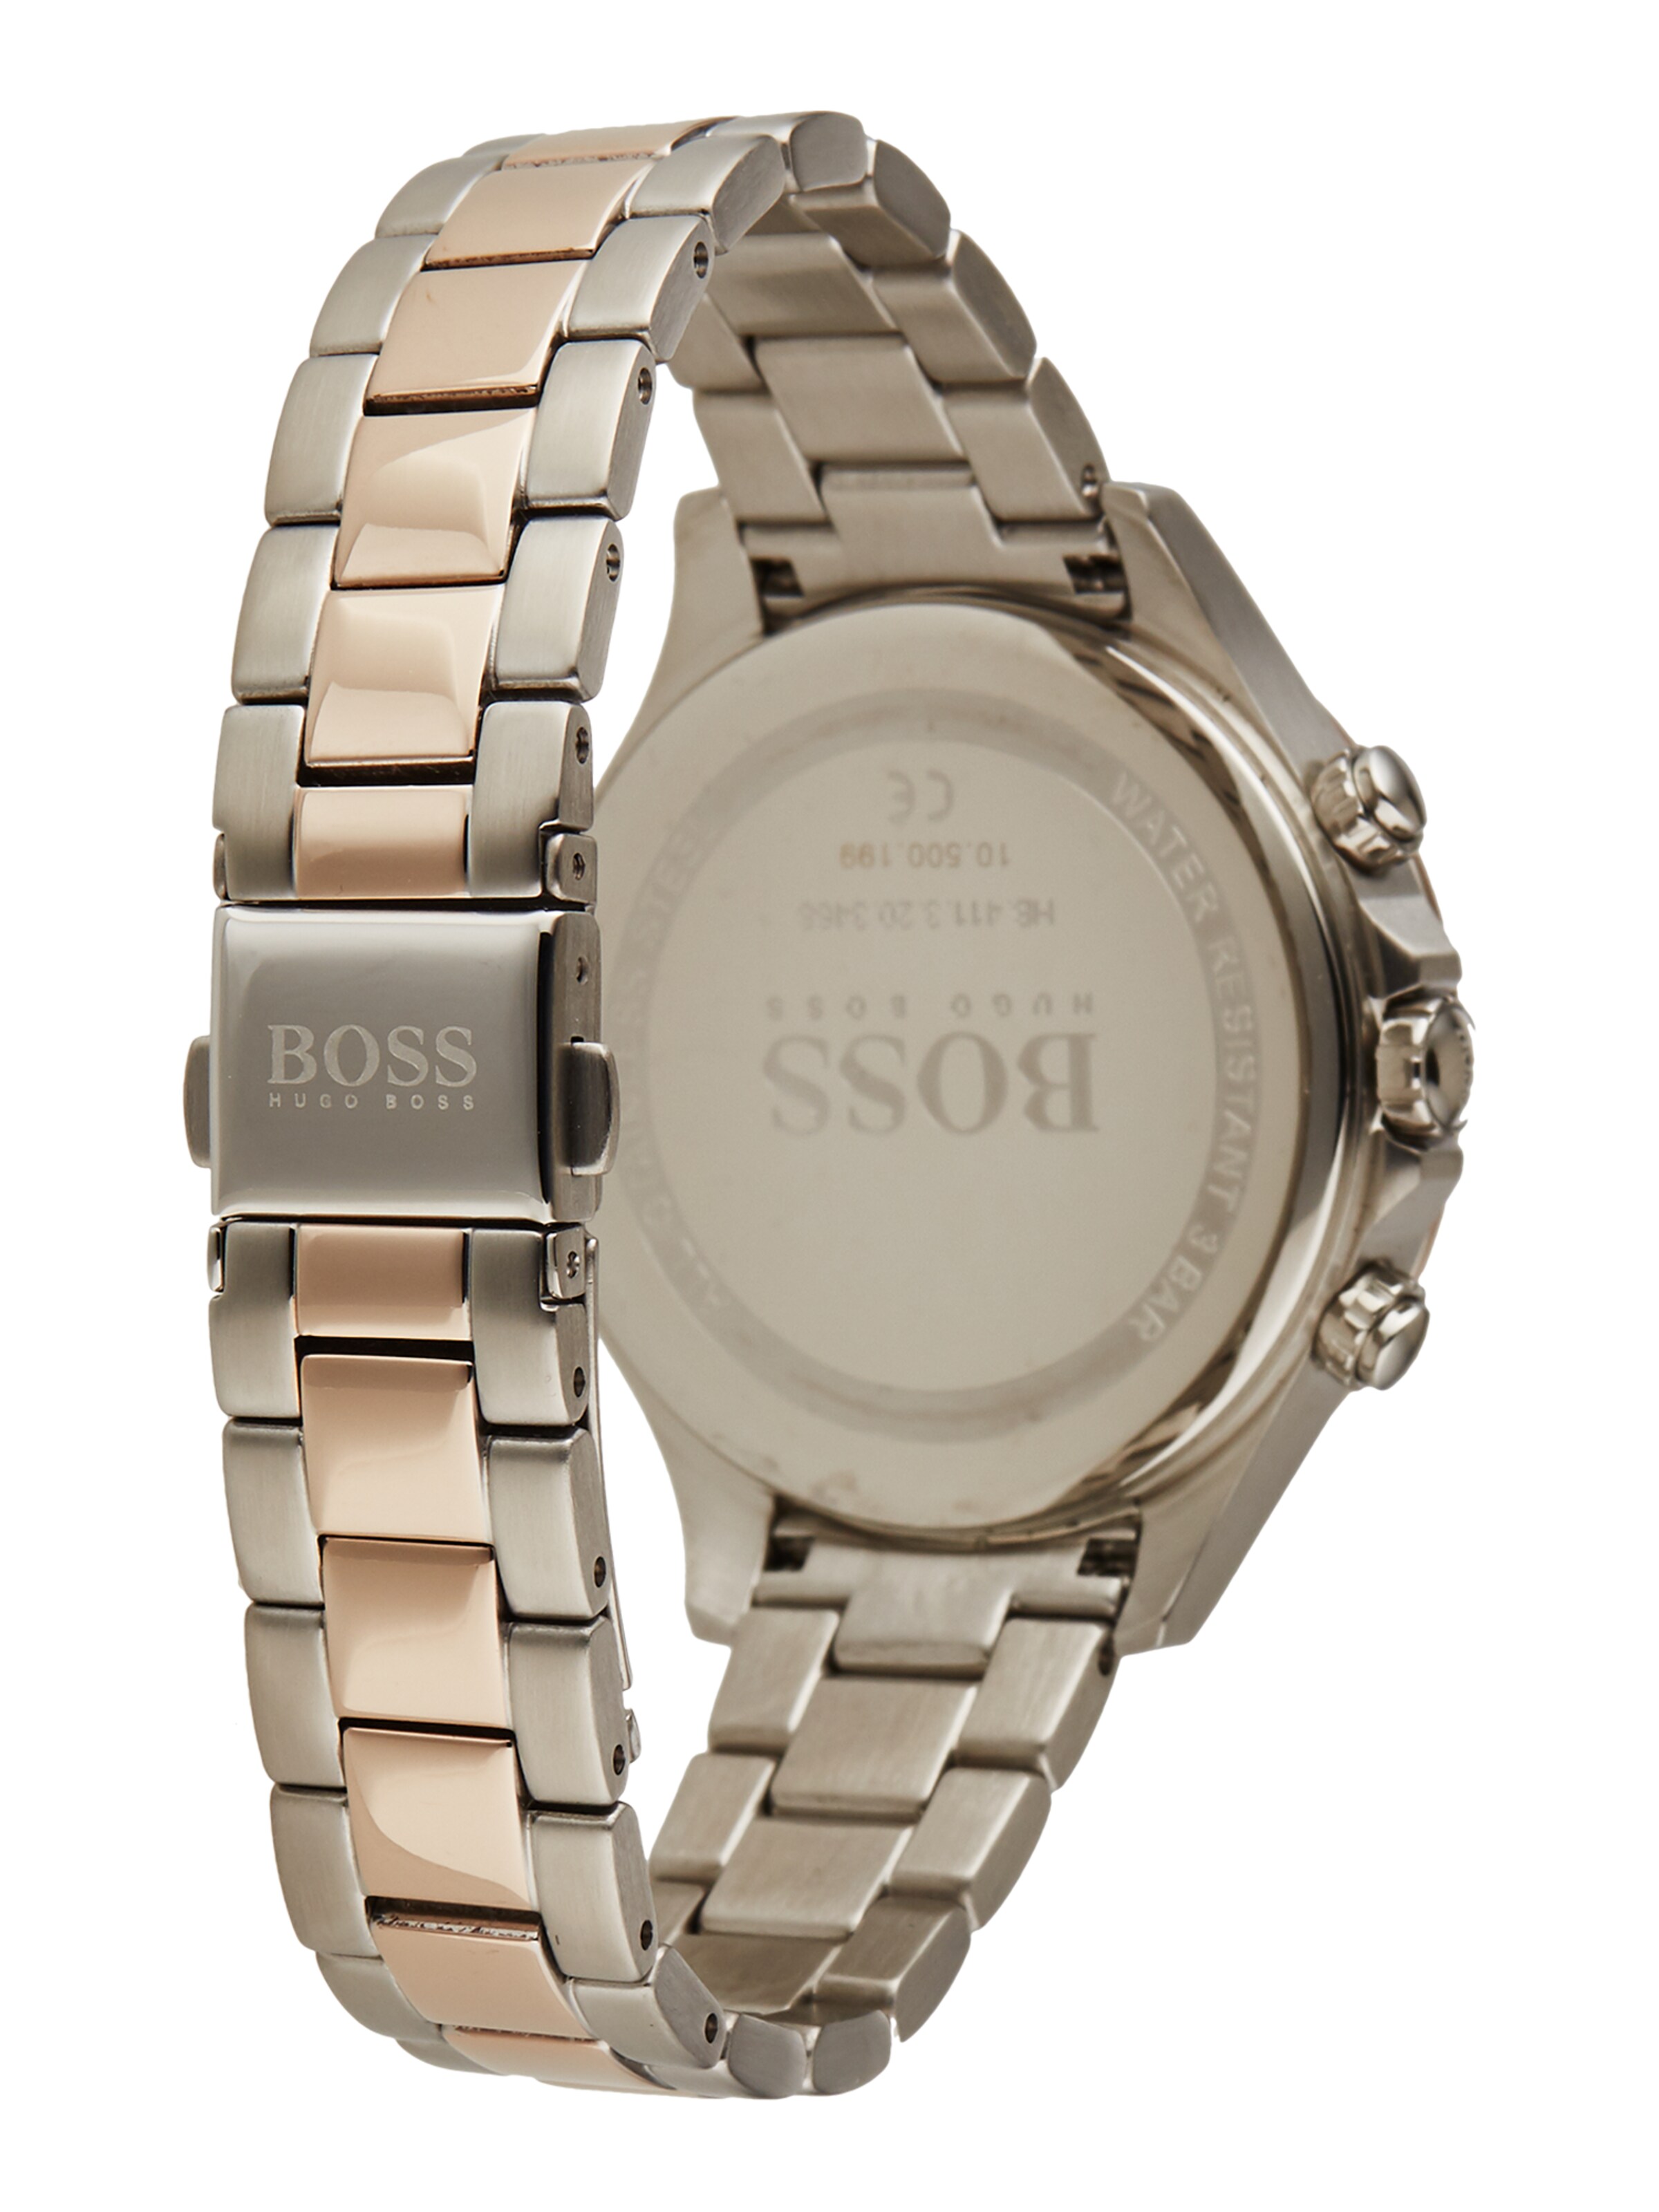 BOSS Casual Uhr Hera in Silber, Rosegold 